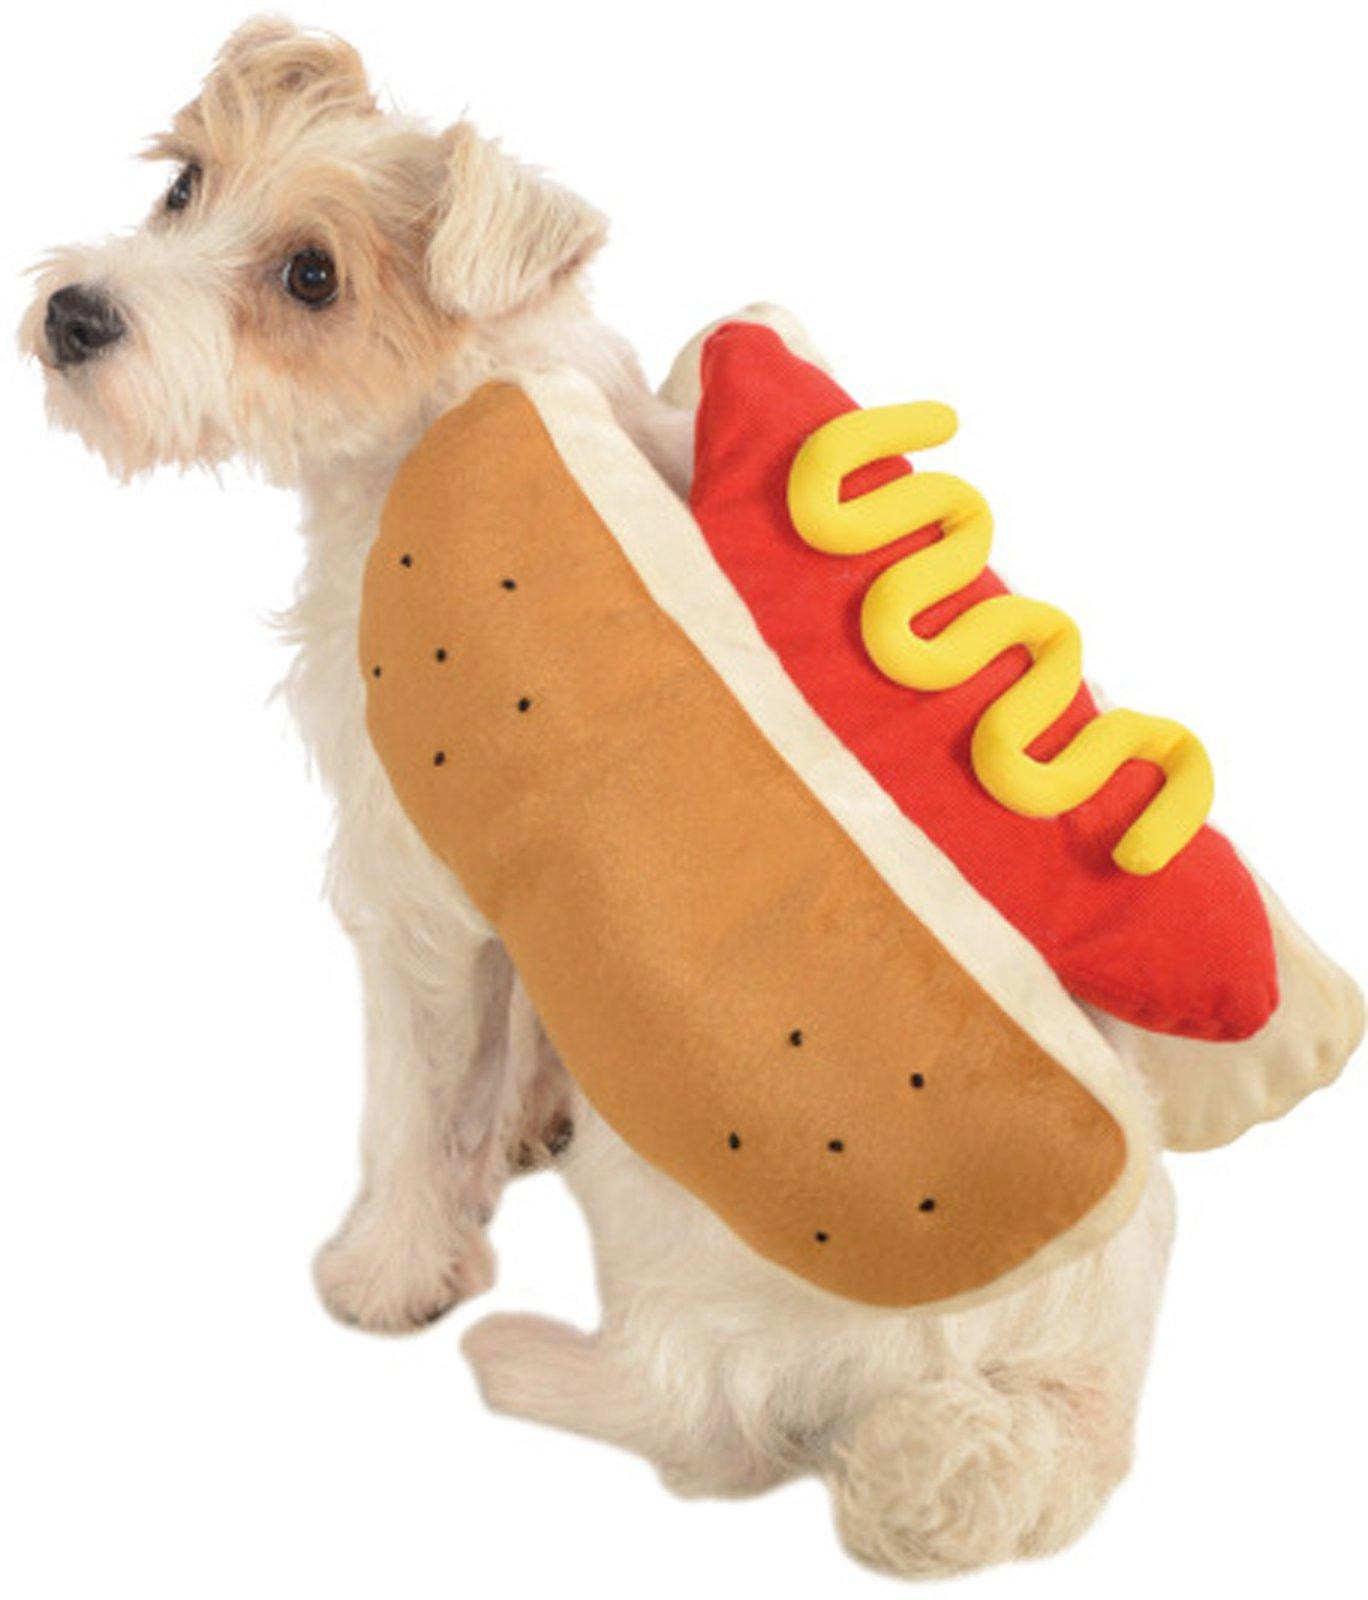 Hot Dog Halloween Costume For Dogs
 Top 10 Tuesdays Dog Costumes Halloween Costume Ideas